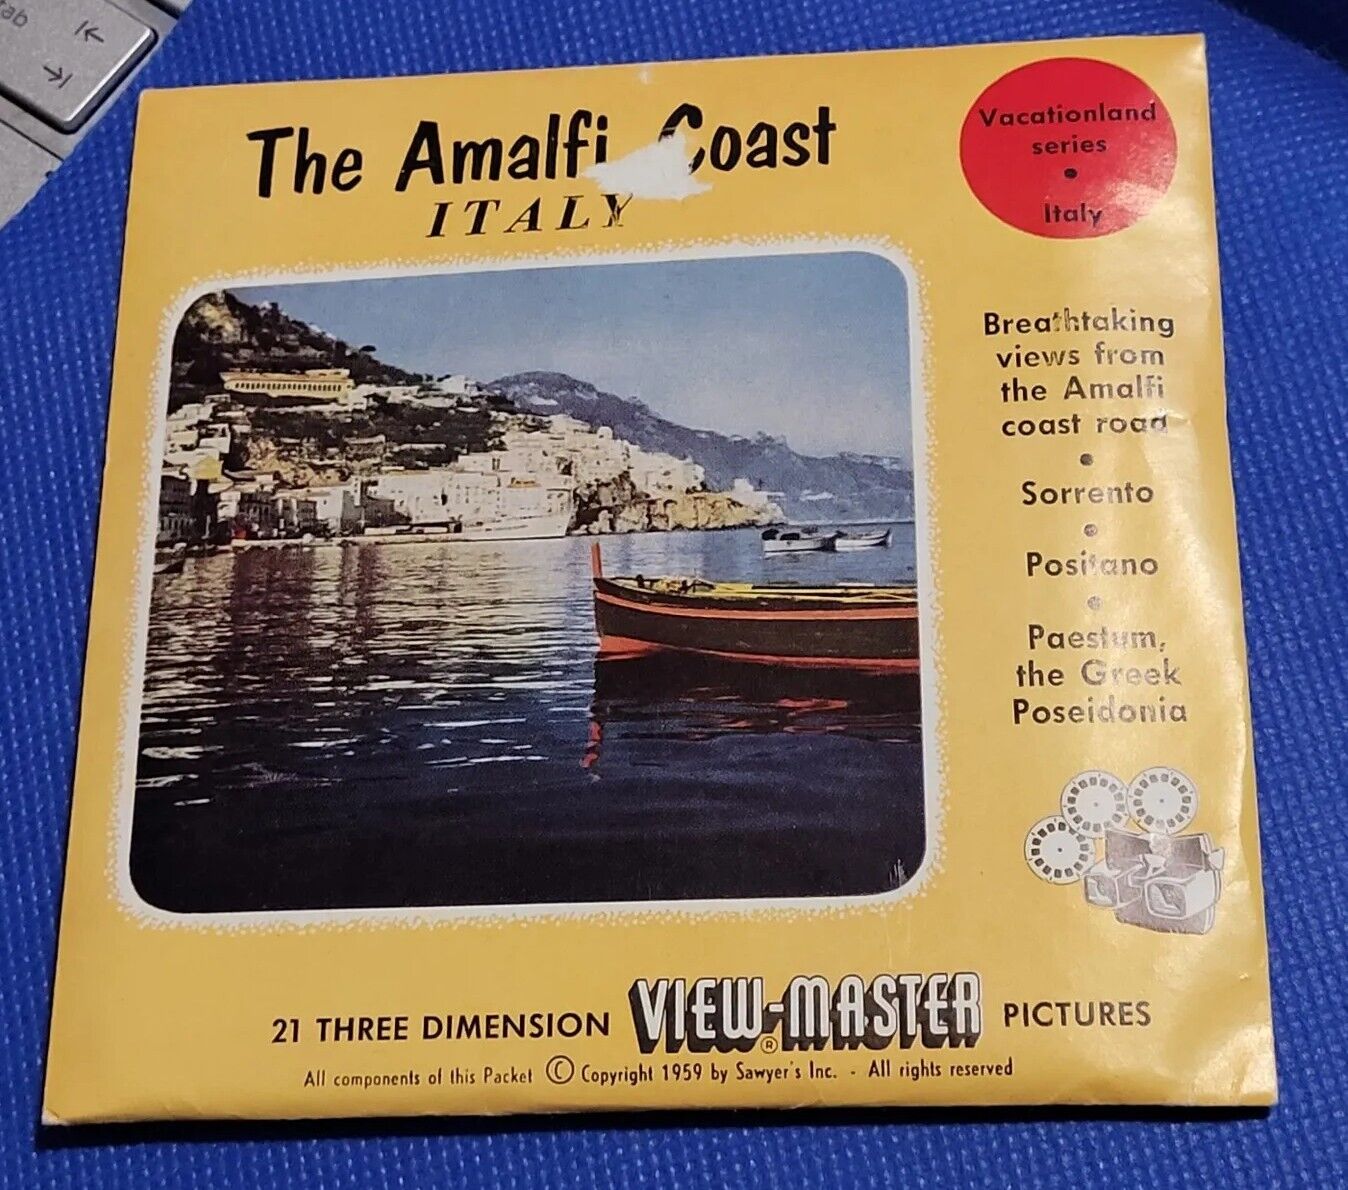 Sawyer's Scarce The Amalfi Coast Italy 1615 A B C view-master 3 Reels Packet